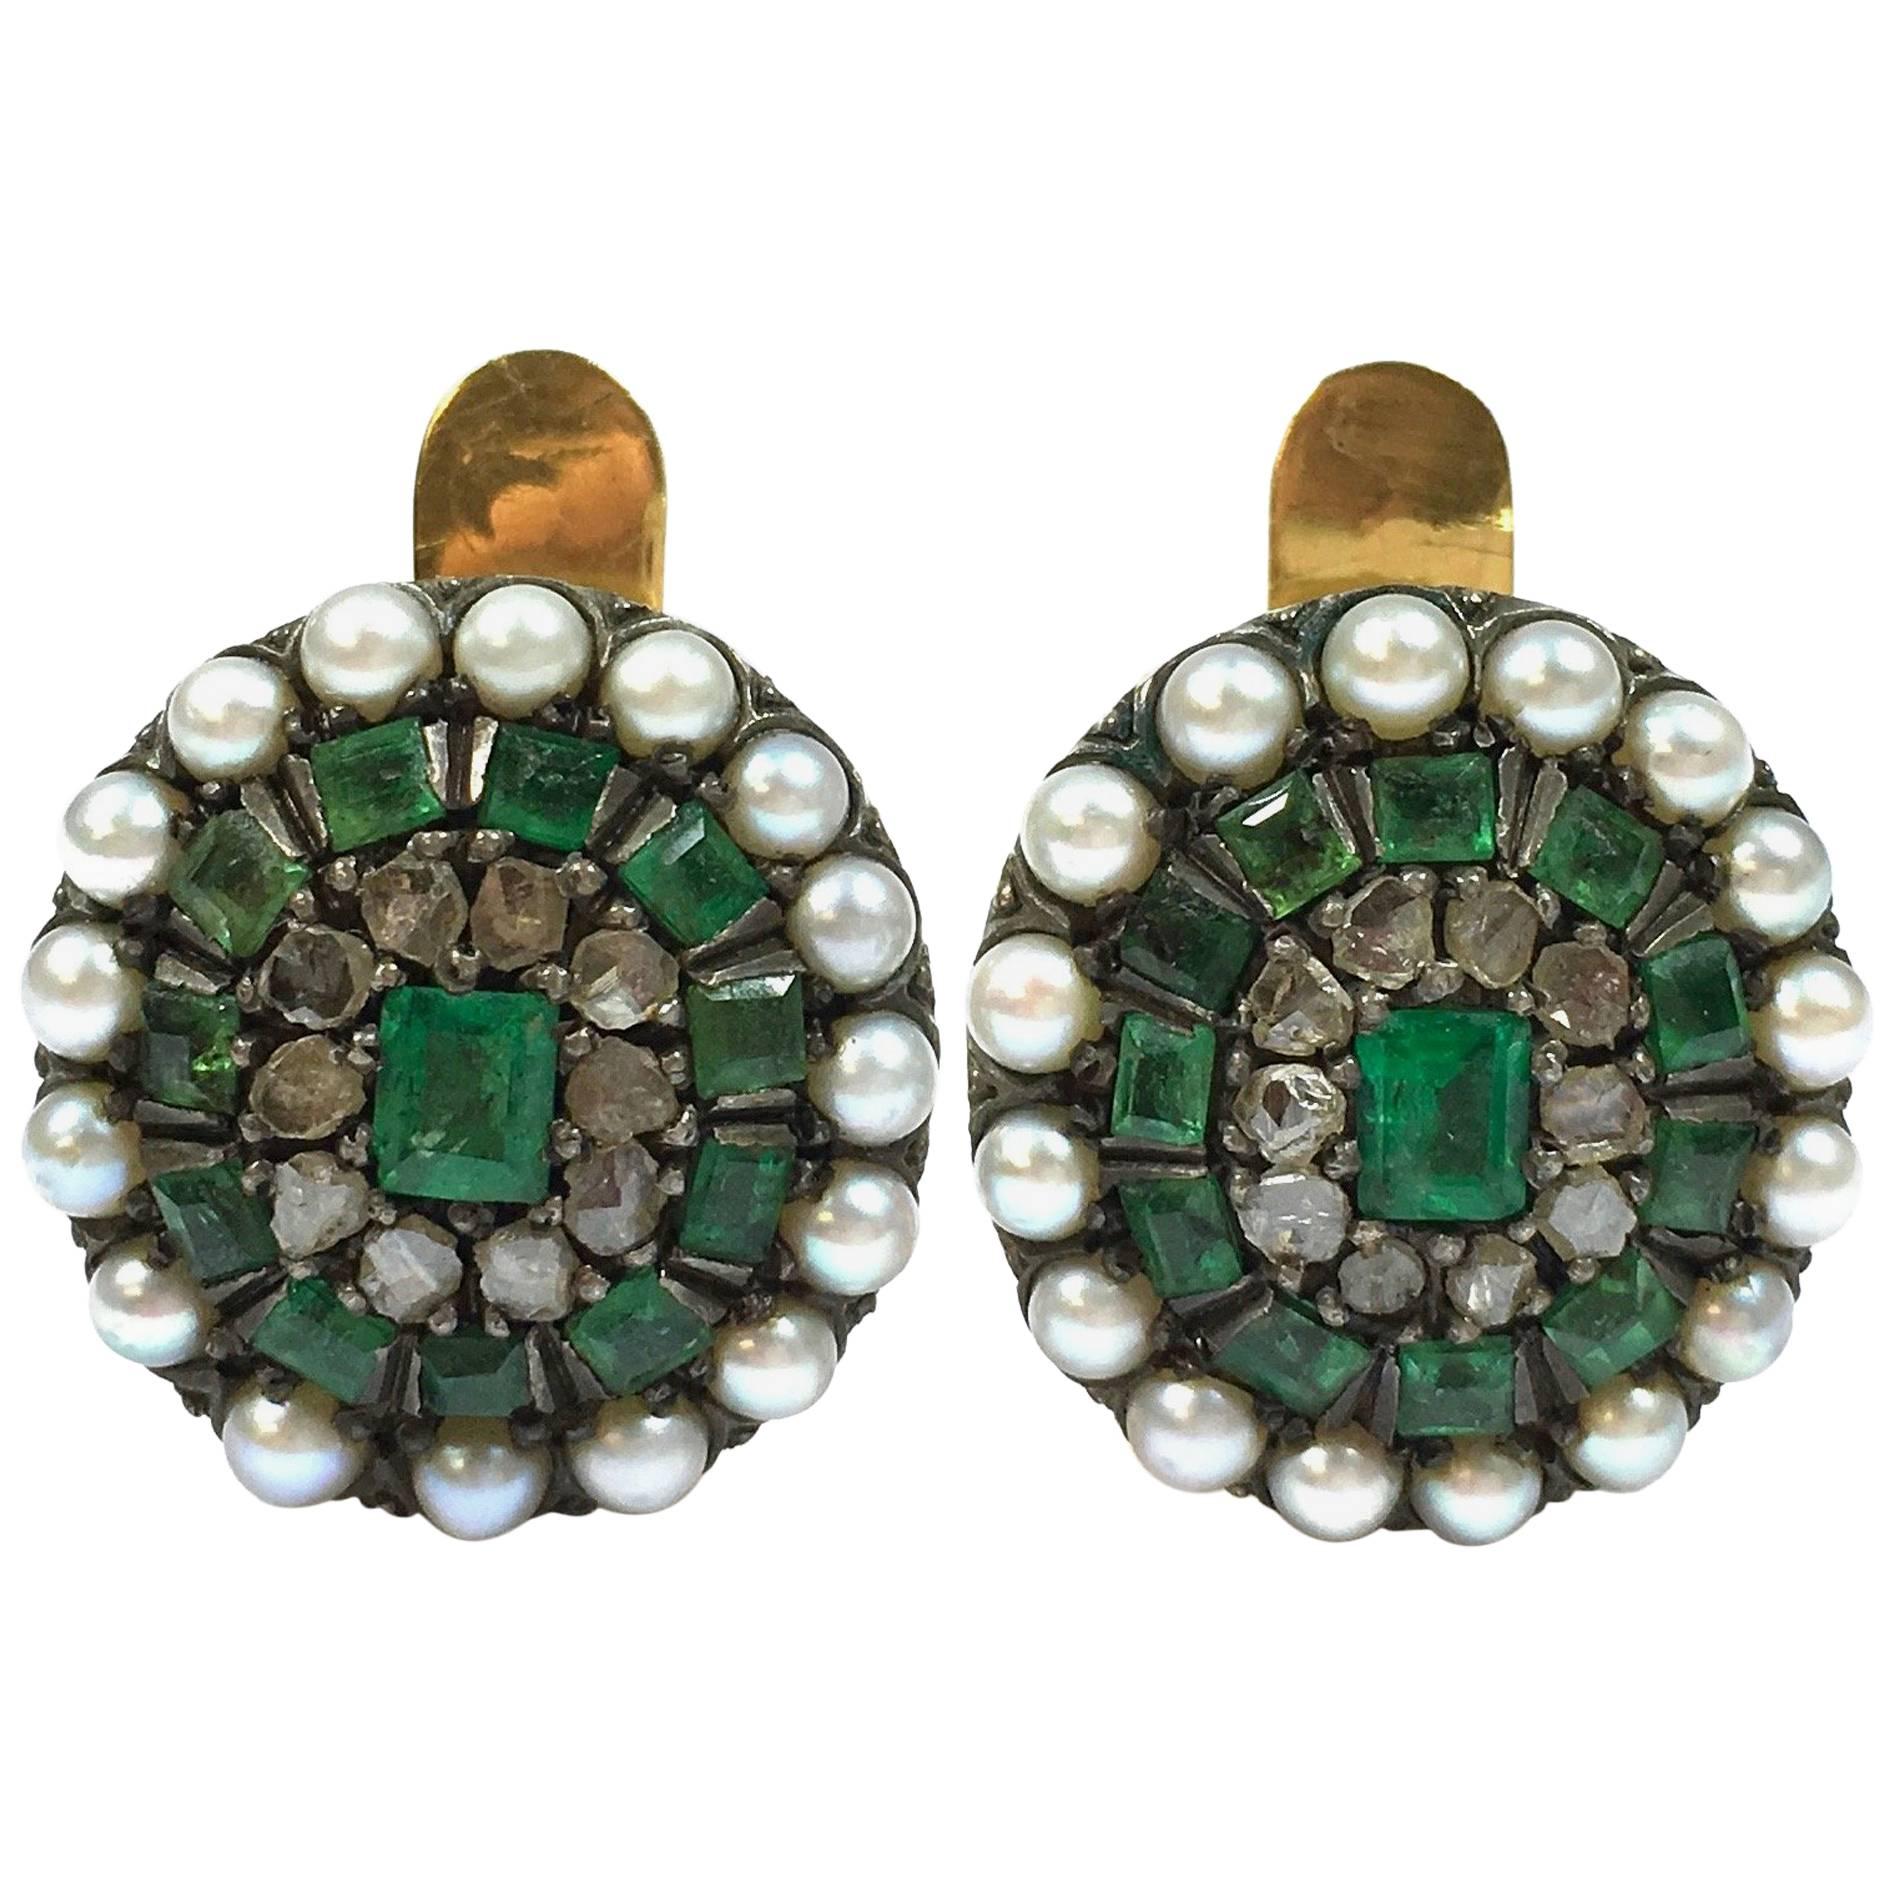 Antique Emerald Pearl and Rose Cut Diamonds Silver and Gold Earrings